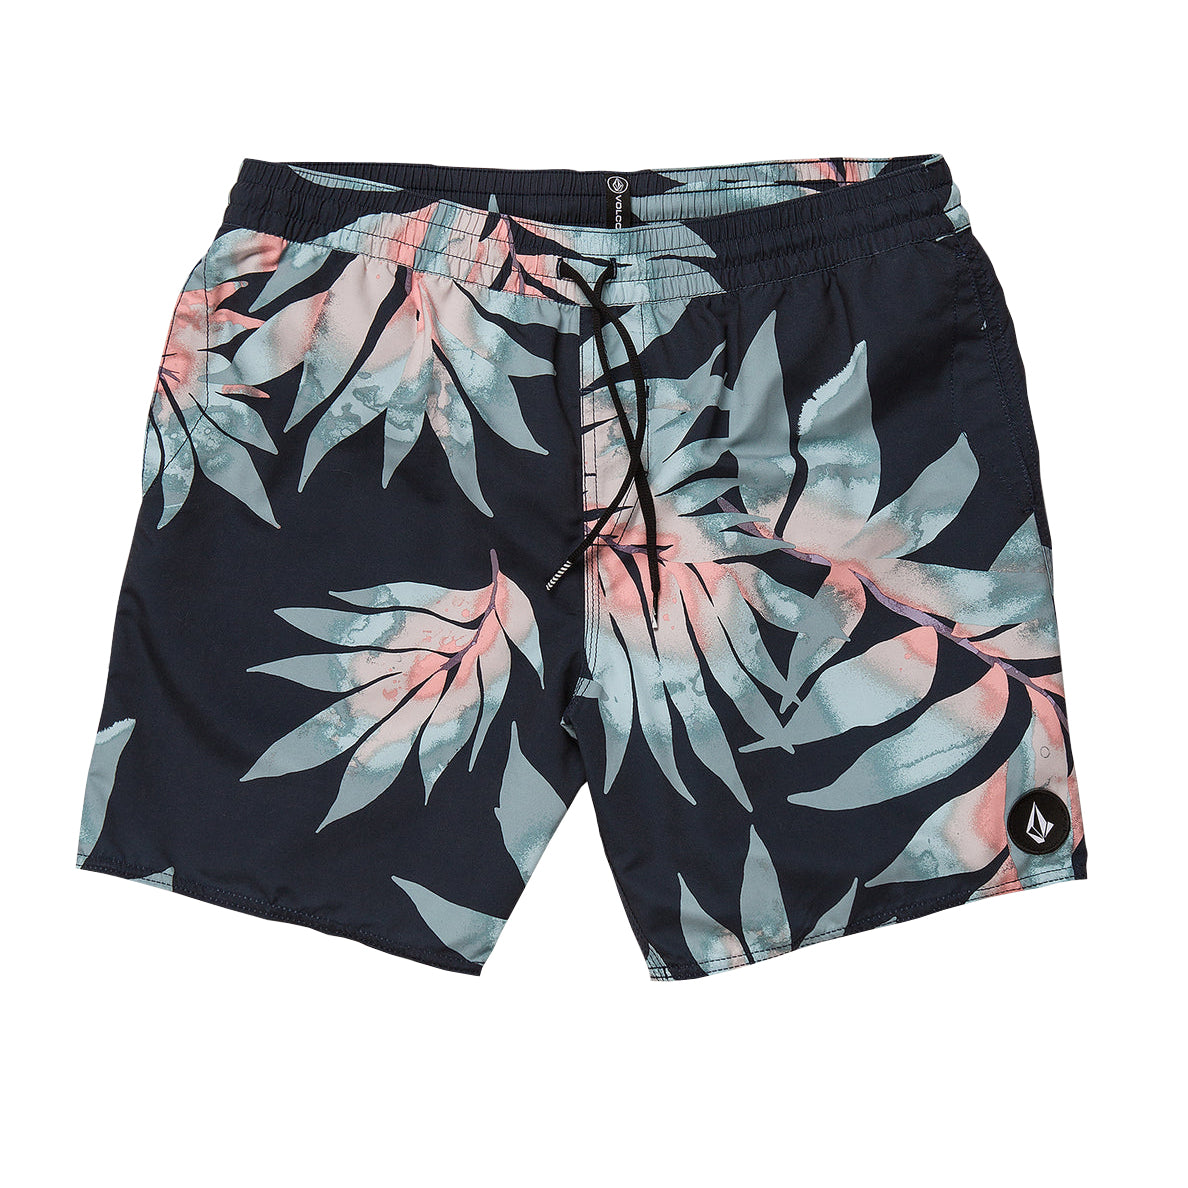 VOLCOM POLLY PACK TRUNK 17 NVY S